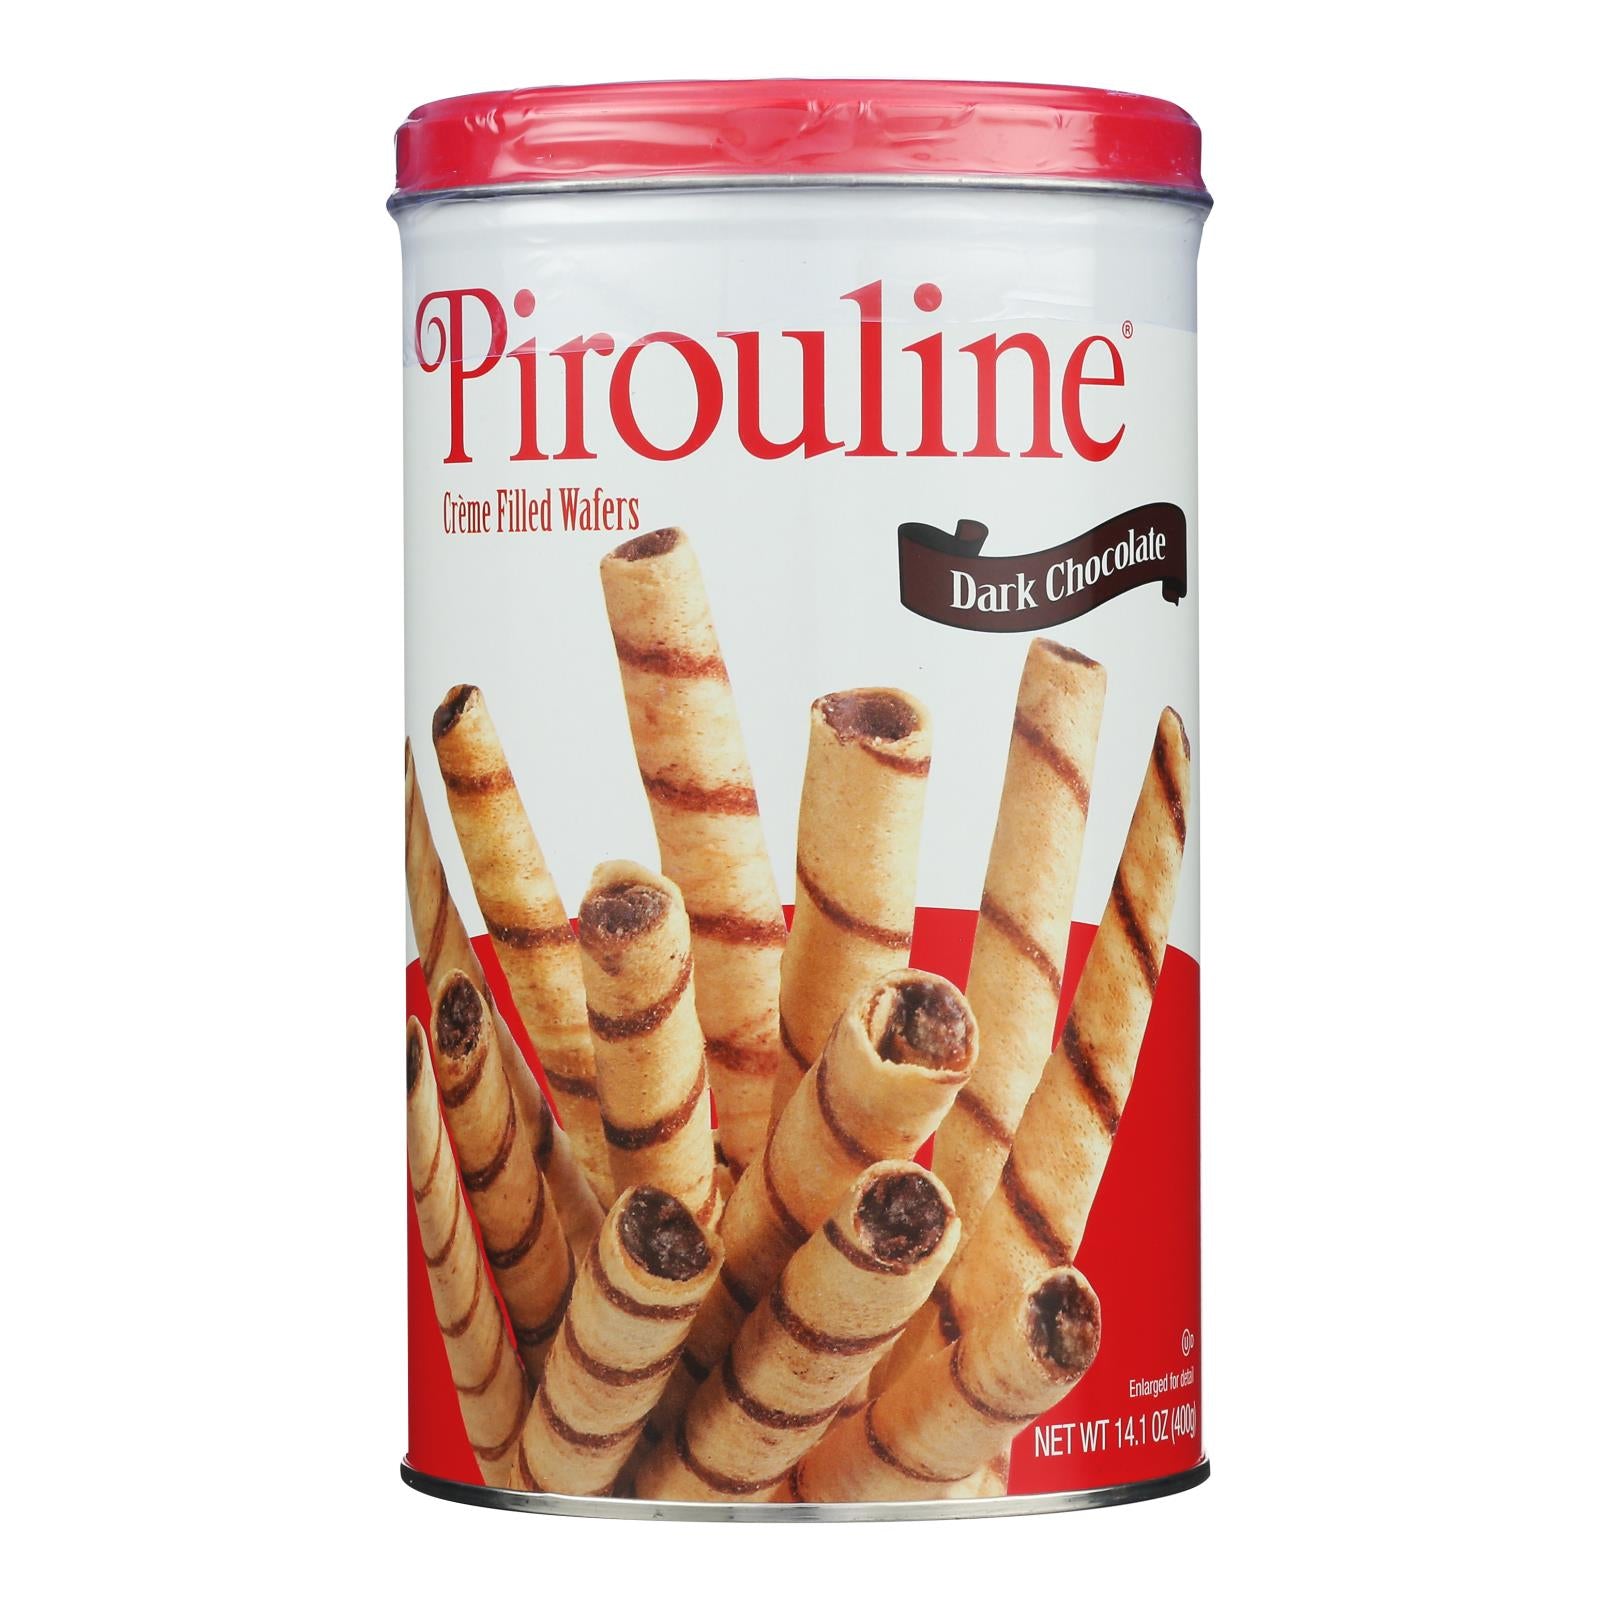 De Beukelaer - Cookies - Pirouline Créme Filled Rolled Wafers - Case of 6 - 14.1 oz.